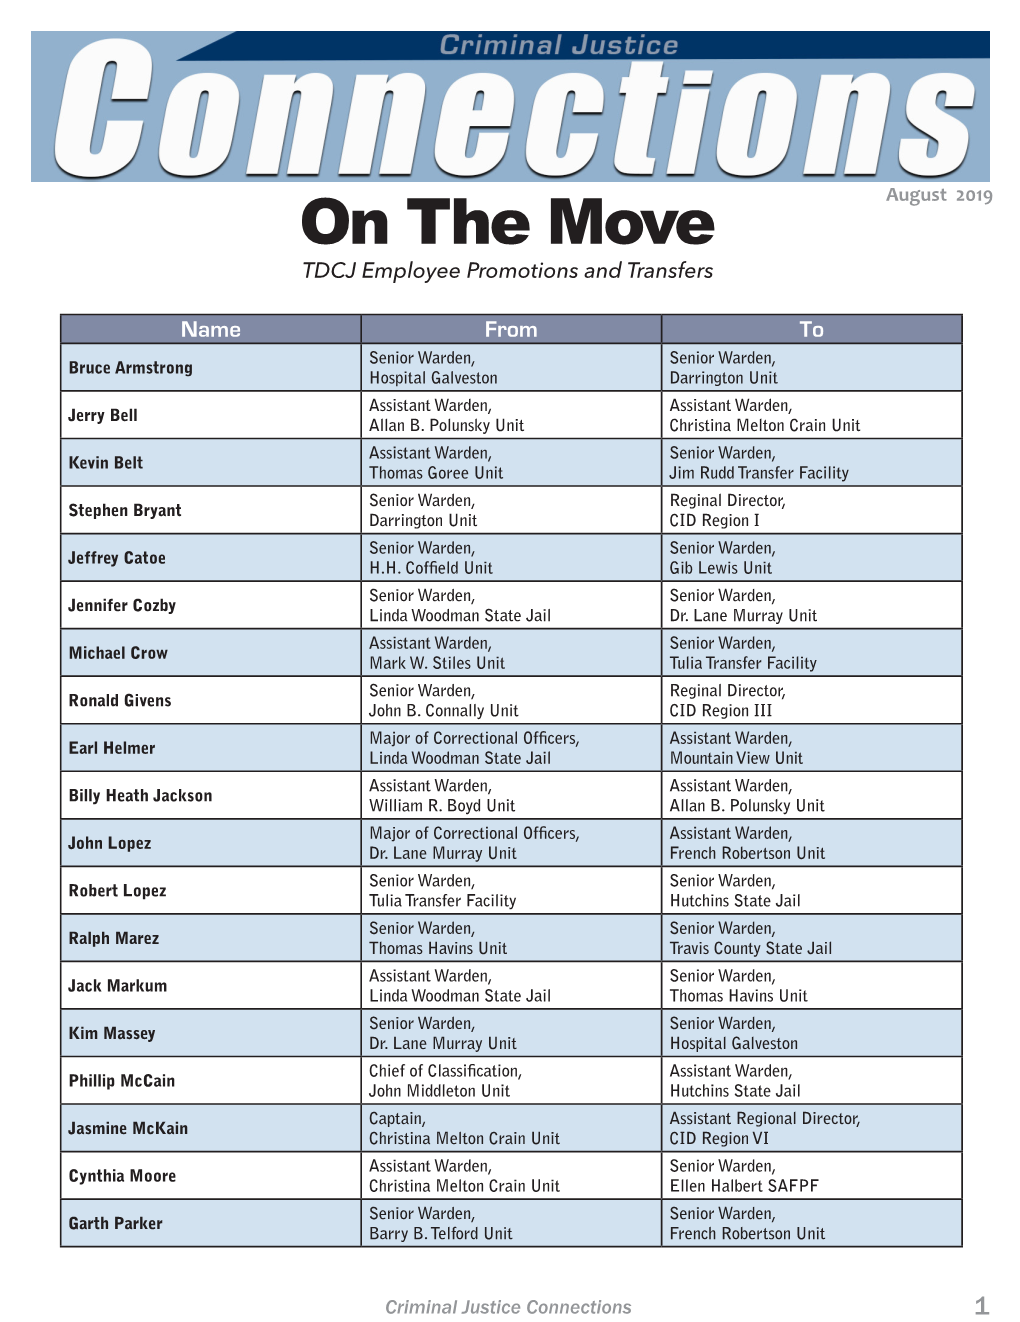 On the Move, August 2019